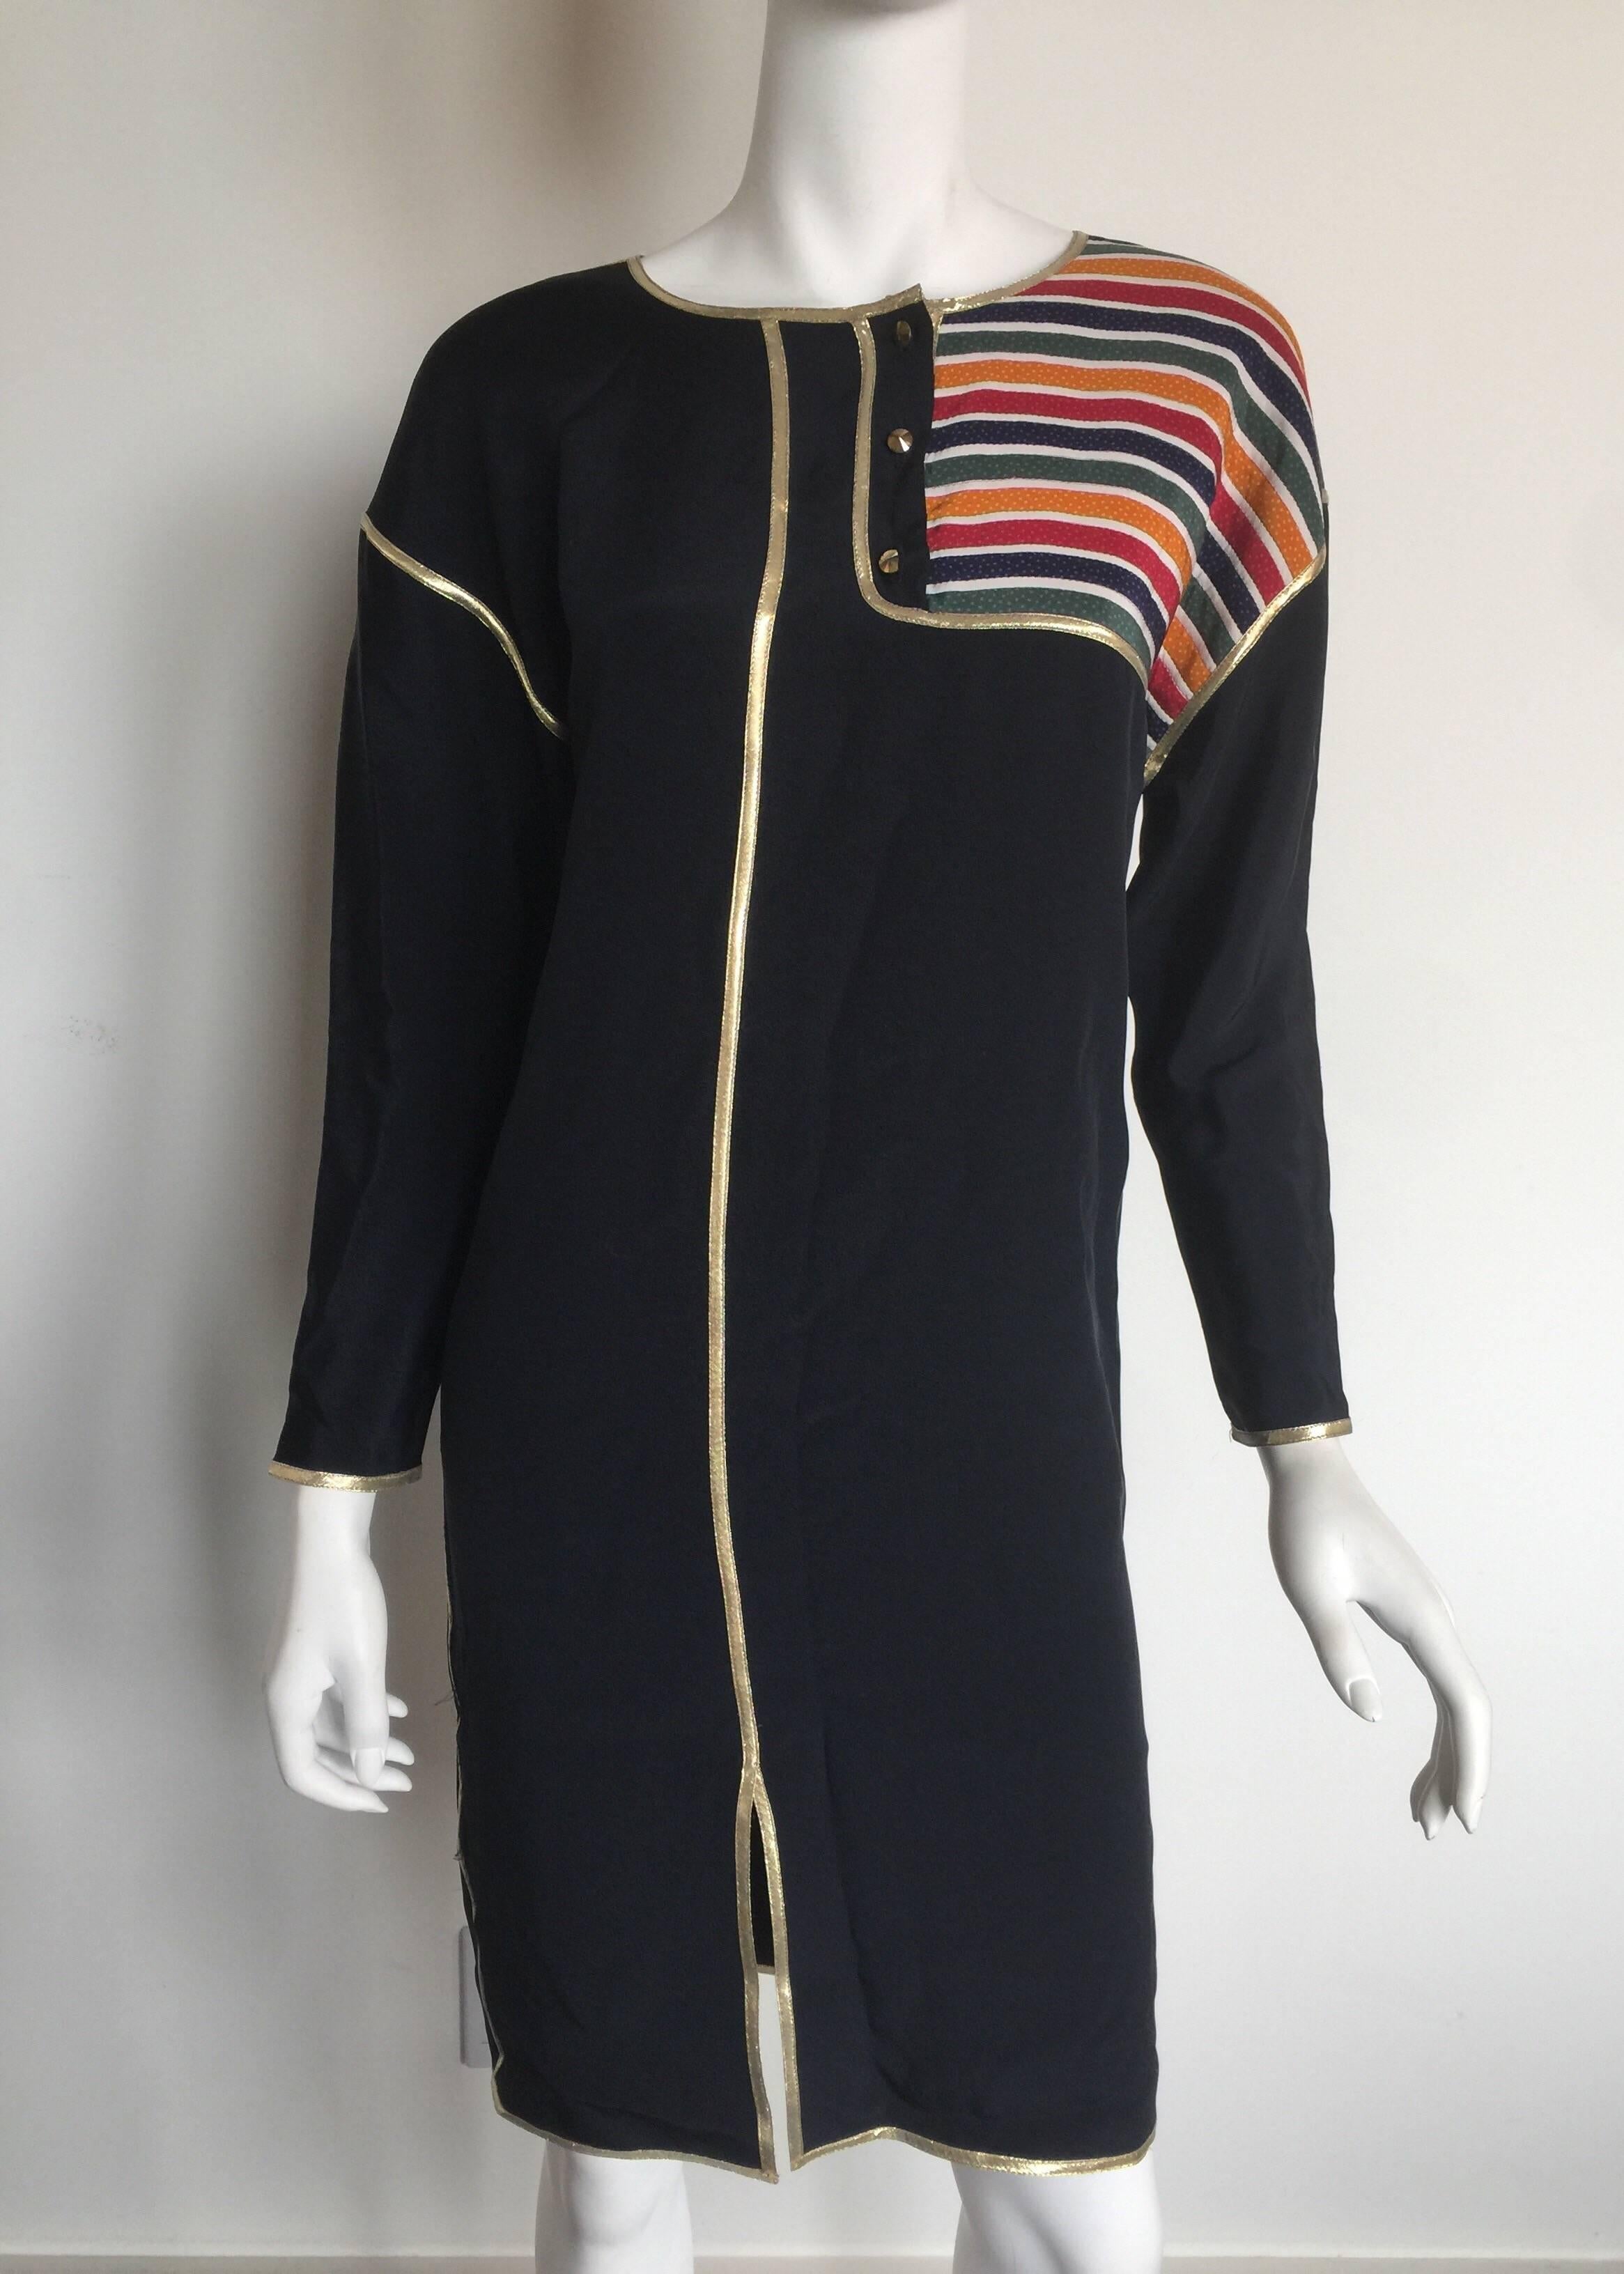 This 1980's asymmetrical stripe dress by Geoffrey Beene combines the comfort of a roomy shift silhouette with flashy gold trim and multi-colored stripes. It offers a mid-thigh slit on the right leg and three gold buttons at the collar. This navy